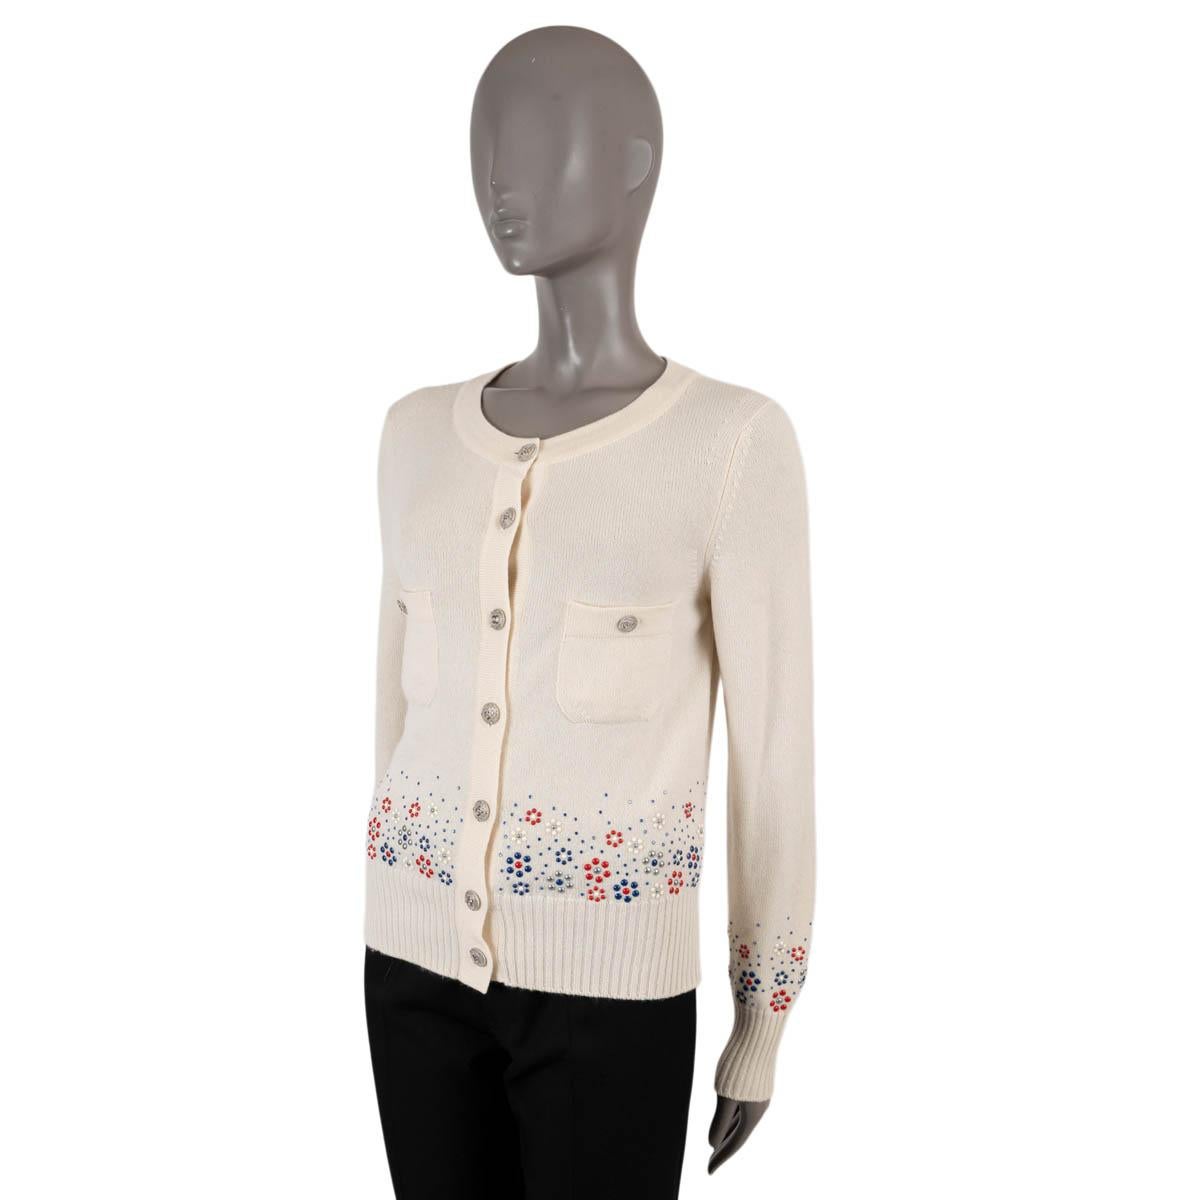 100% authentic Chanel round-neck cream cashmere (100%) cardigan embellished with red, grey, blue and cream floral studs and blue crystals. The design features two buttoned chest pockets, ribbed cuff and waistband and silver-tone CC logo front